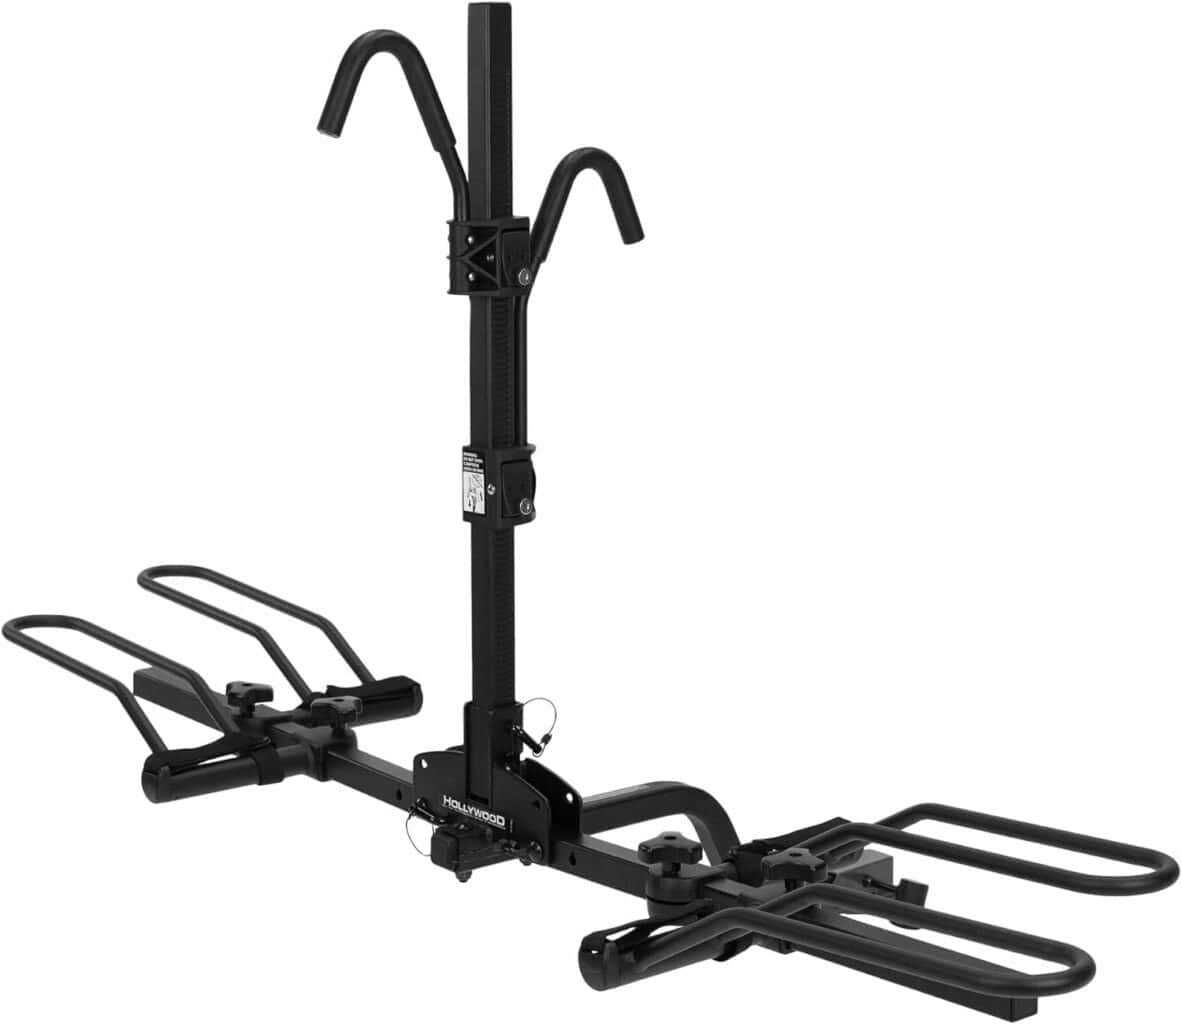 Hollywood Racks, Trail Rider, Hitch Mount Rack, 1-1/4 and 2, Bikes: 2